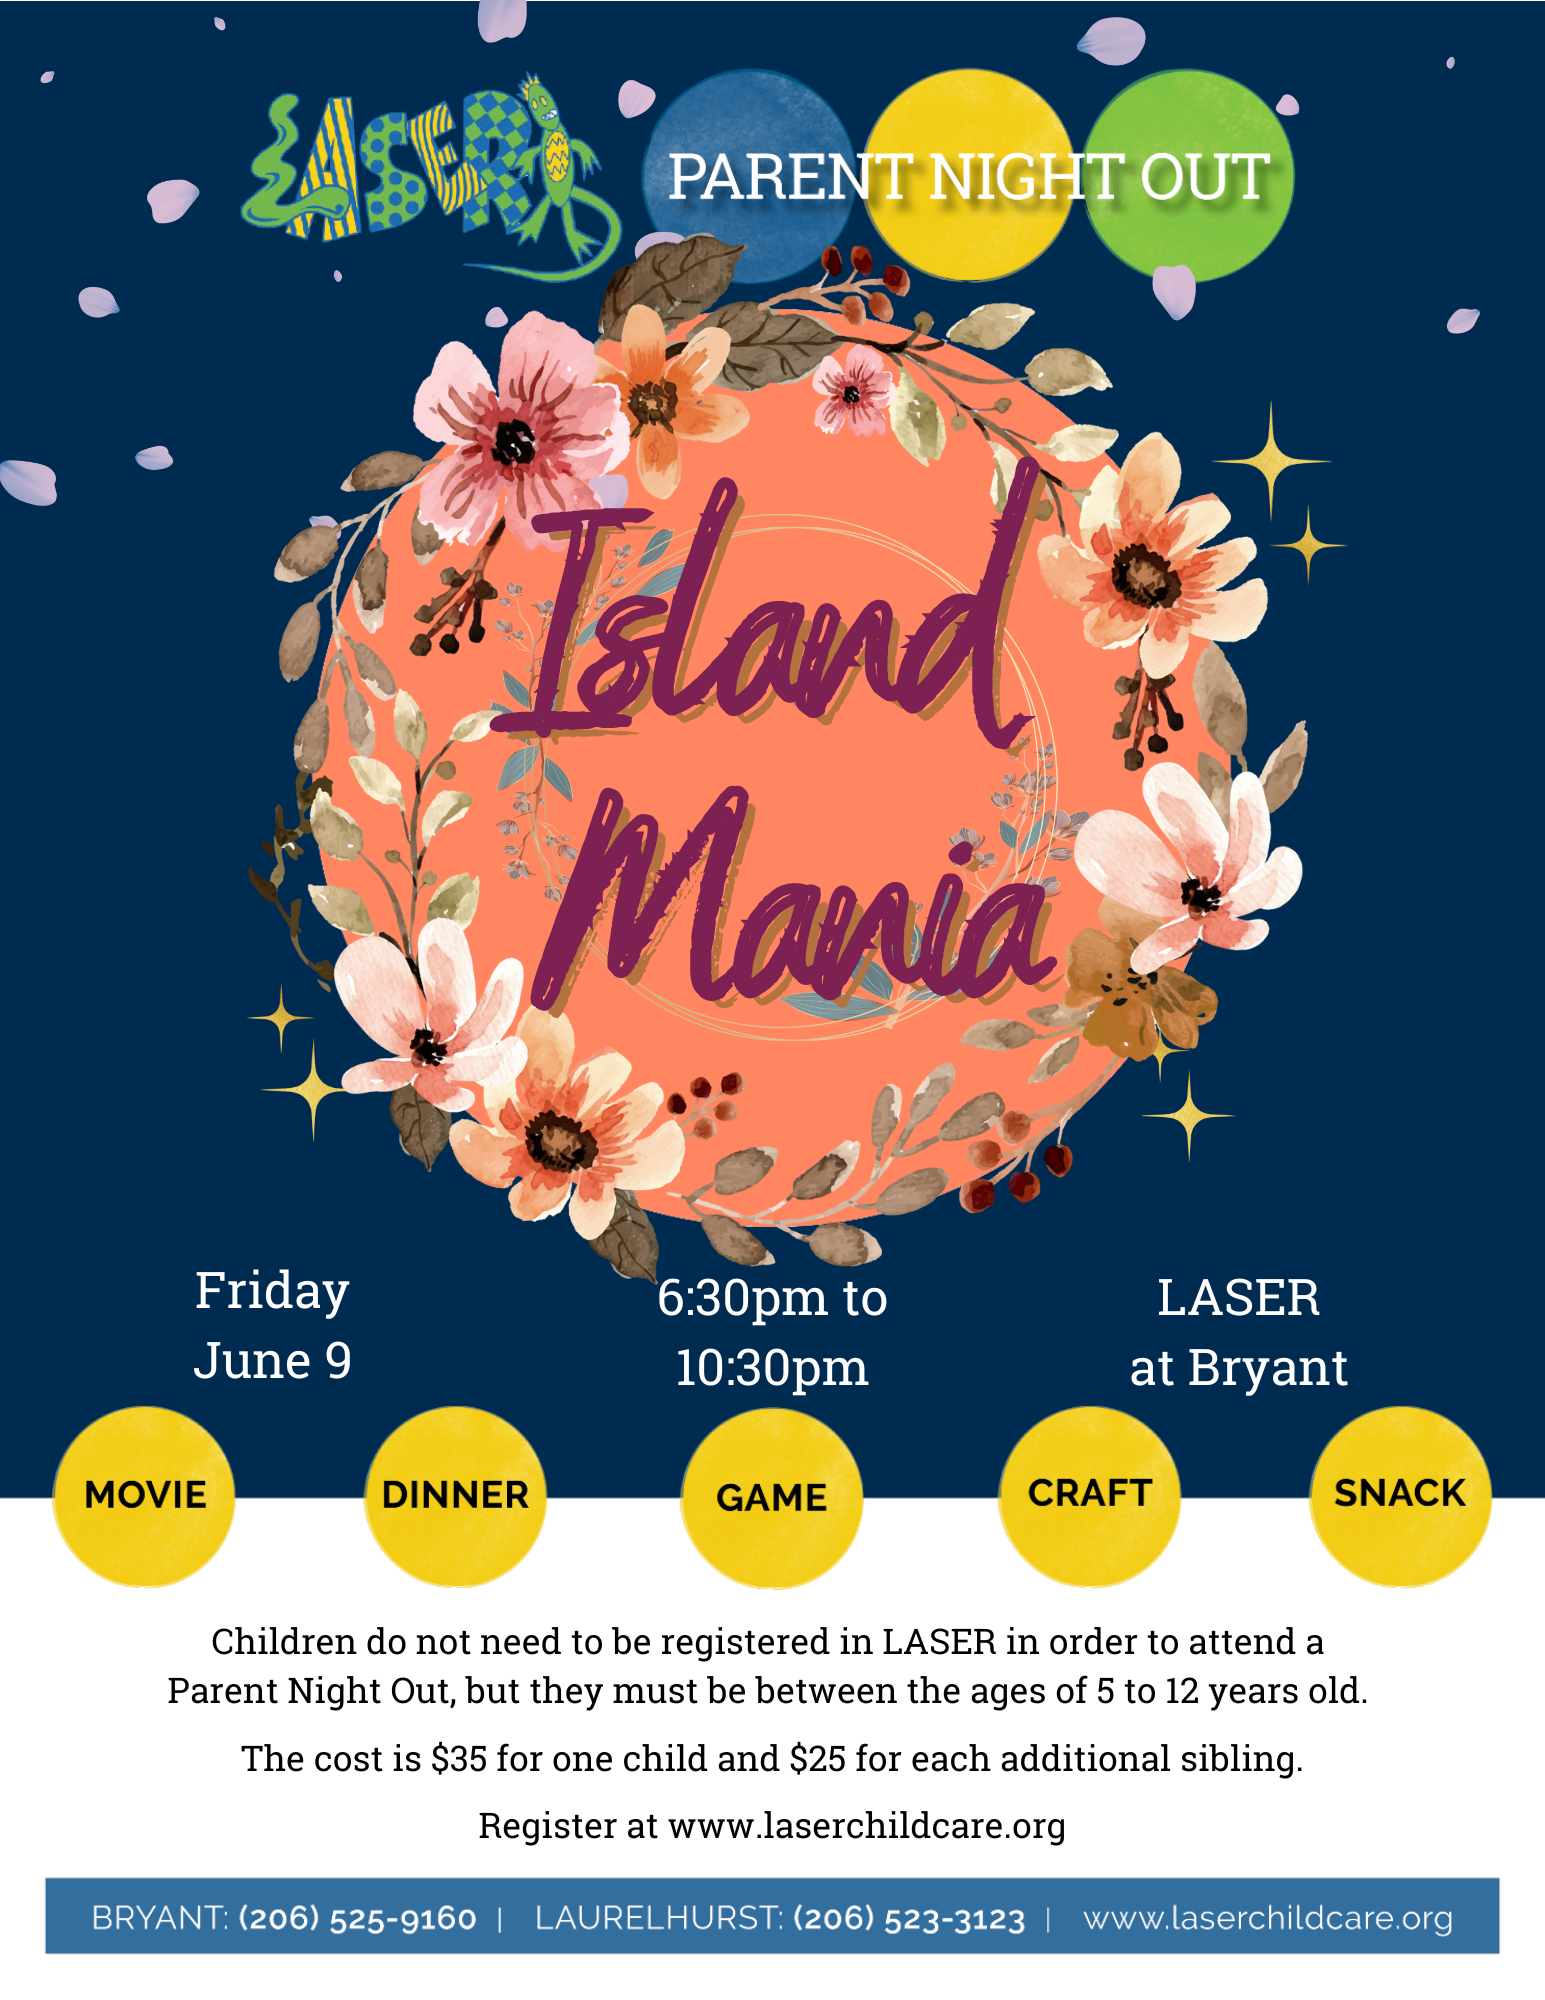 Laser Parent Night Out - Island Mania, June 9